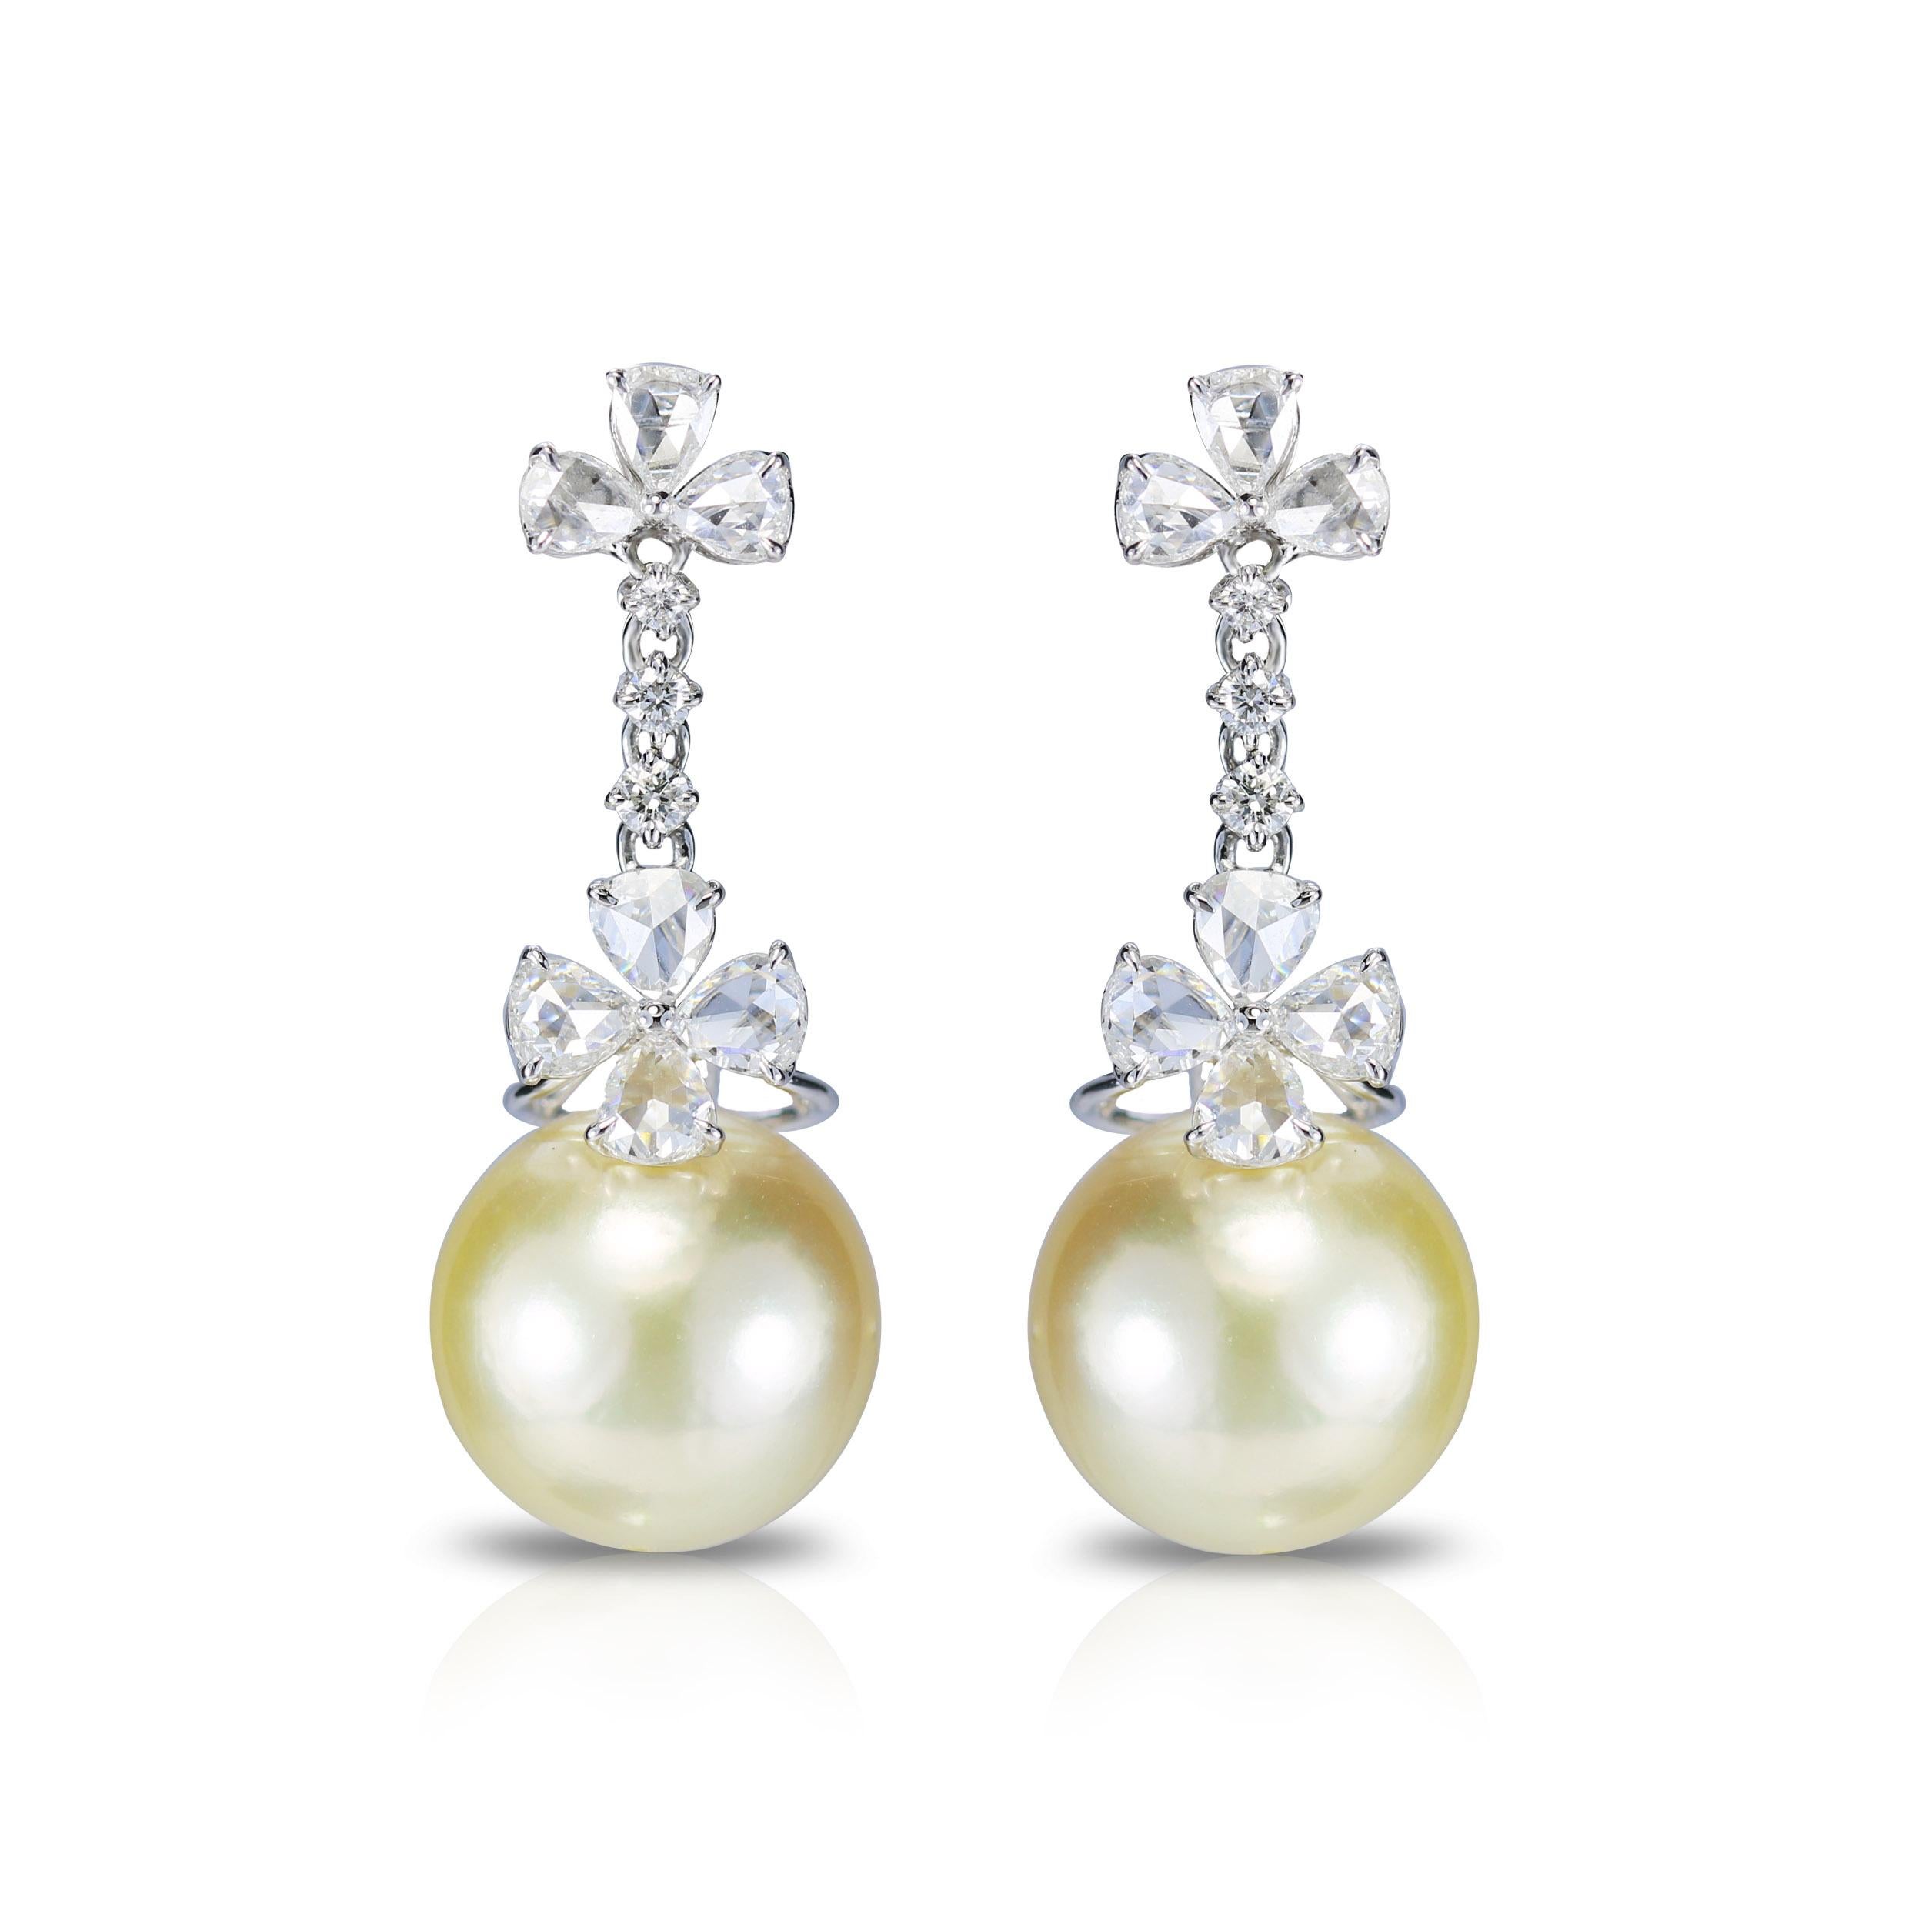 Diamond and south sea pearl earrings

Feminine and classy, this pair of 18K white gold earrings featuring pear rose cut and round brilliant cut diamonds and south sea pearls in a prong setting is the modern connoisseur's must-have piece. This